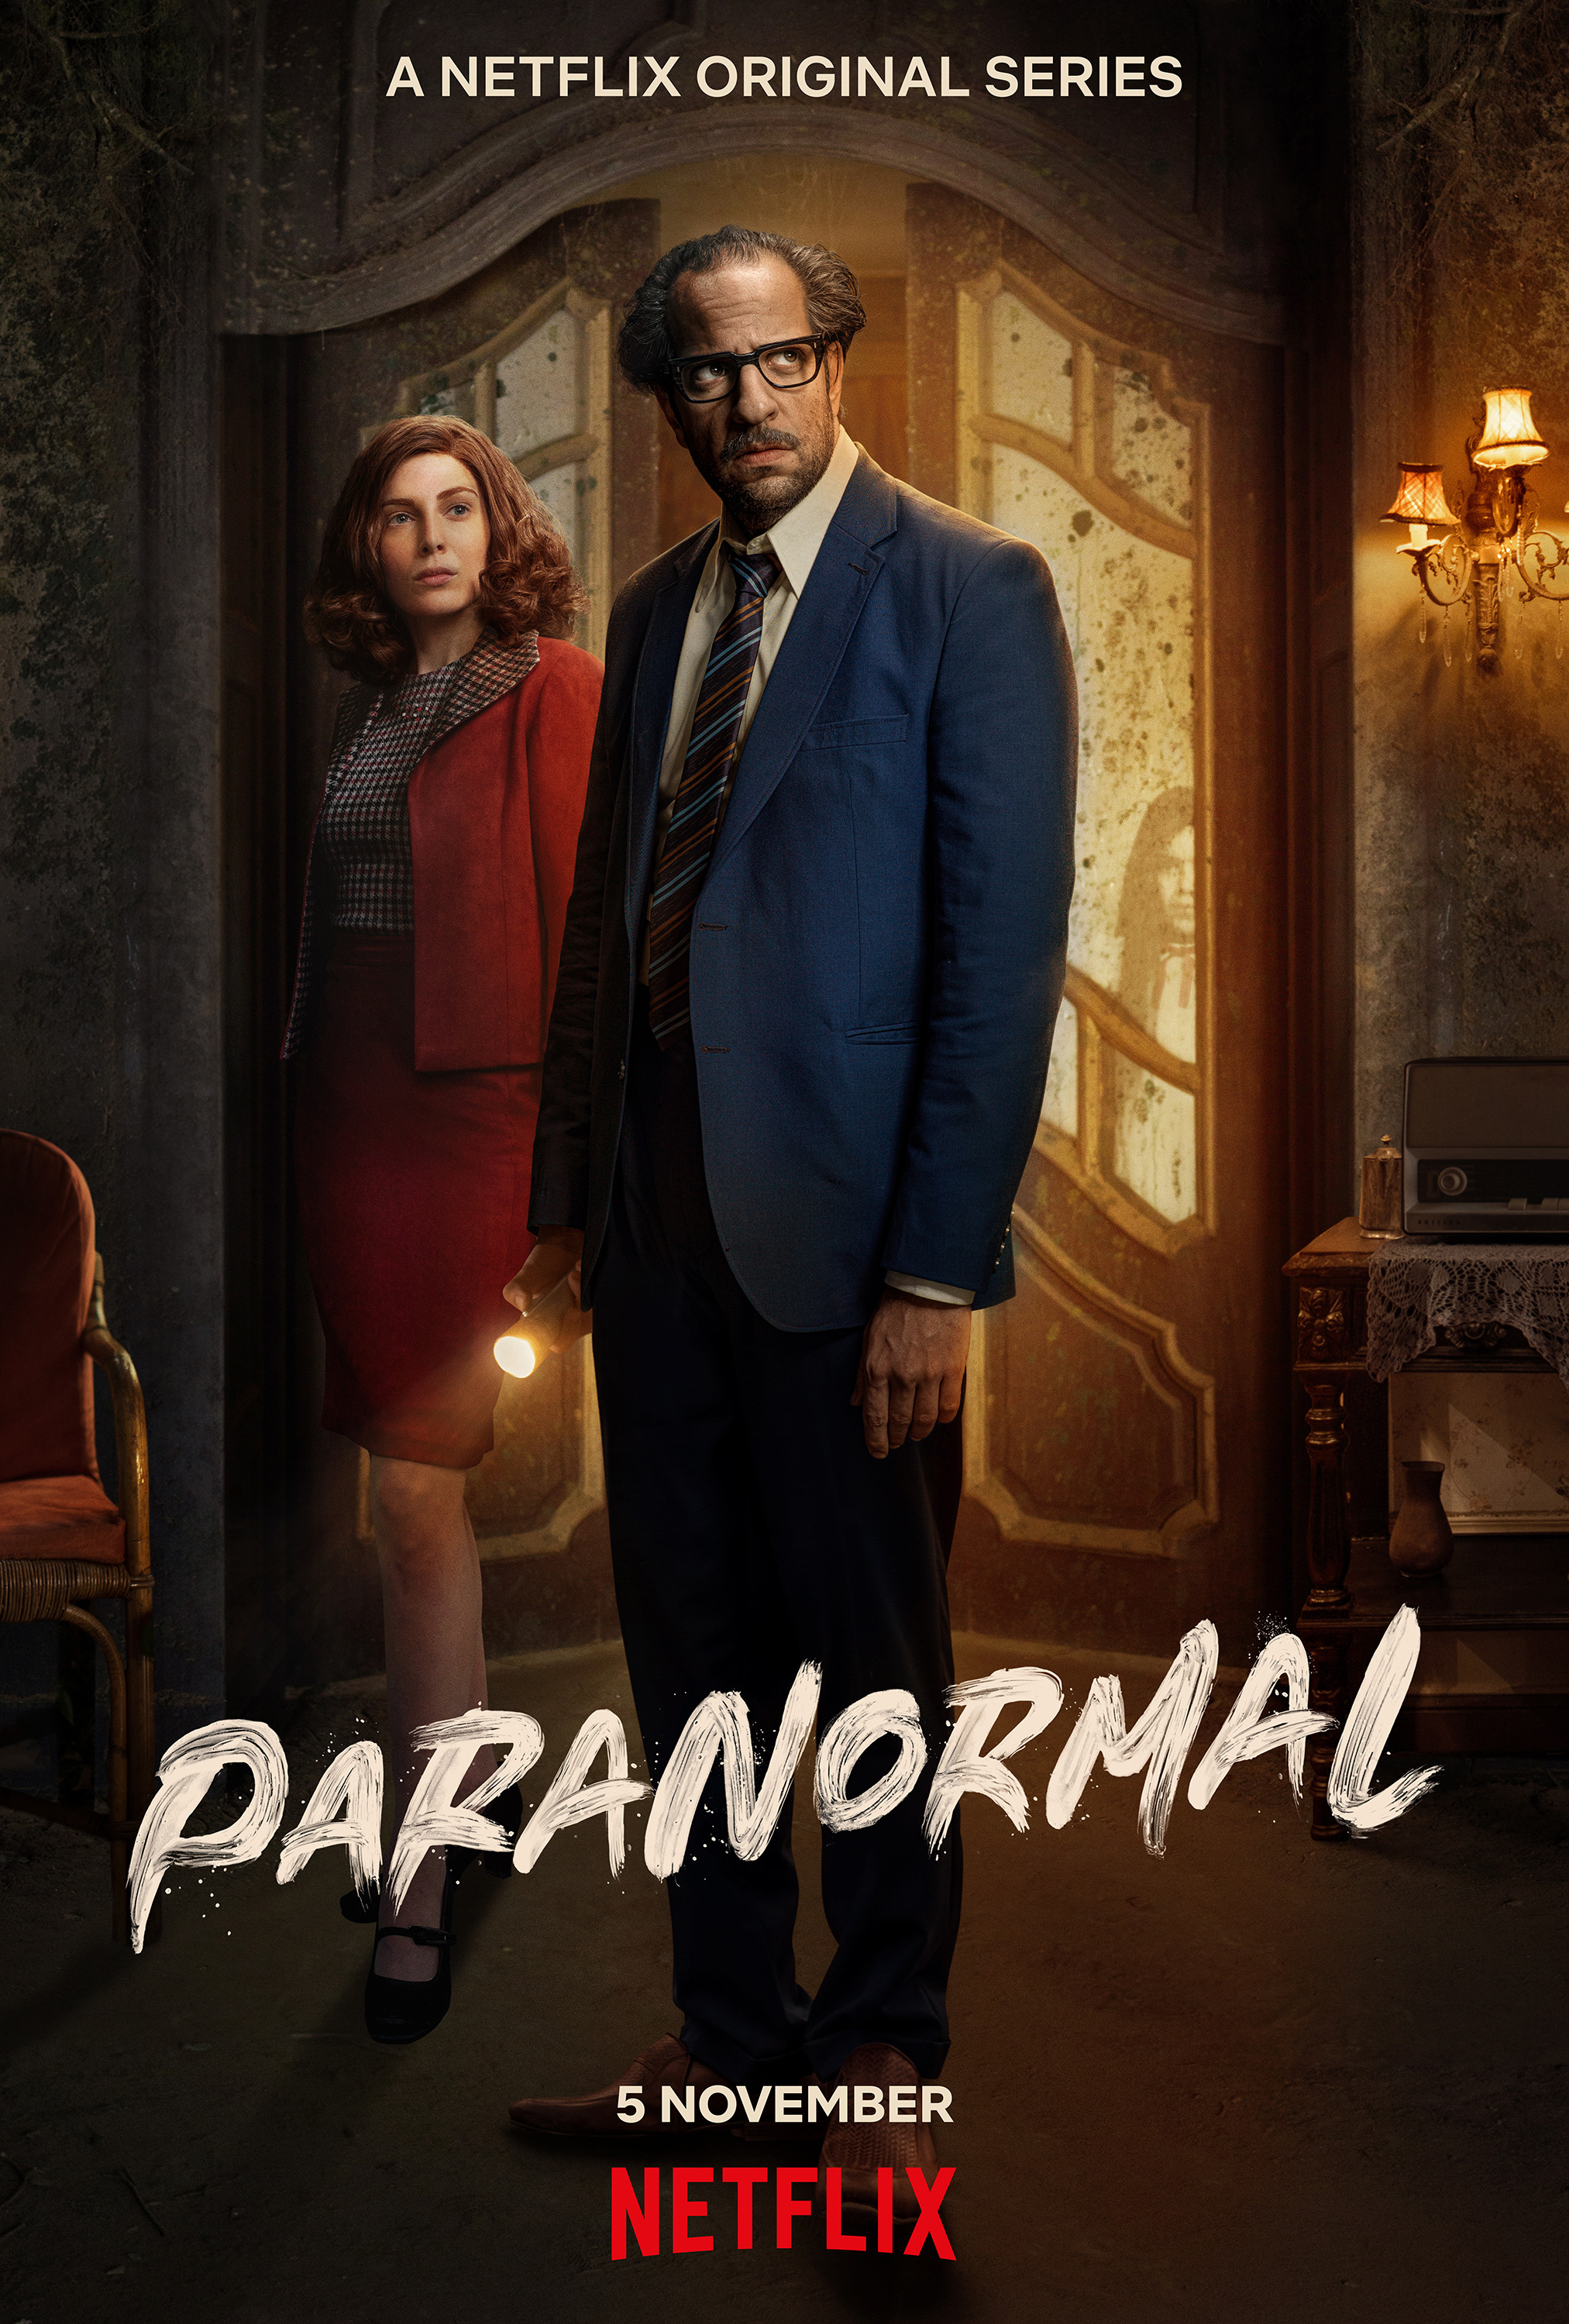 Mega Sized TV Poster Image for Paranormal 